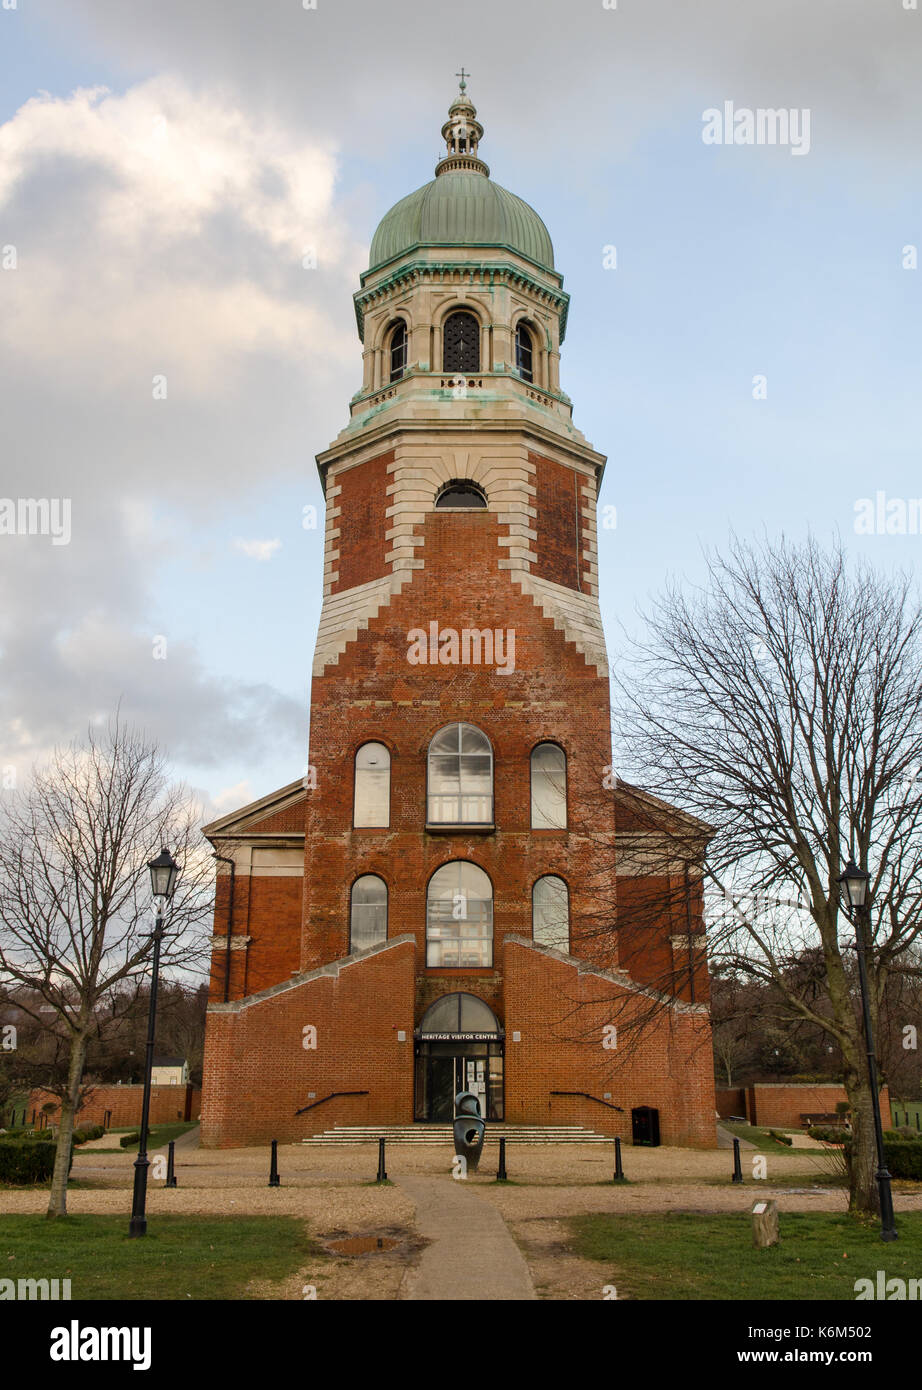 Southampton, England, UK - February 16, 2014: The hospital chapel of the demolished Royal Victoria Hospital stands alone in the parkland of Netley Cou Stock Photo